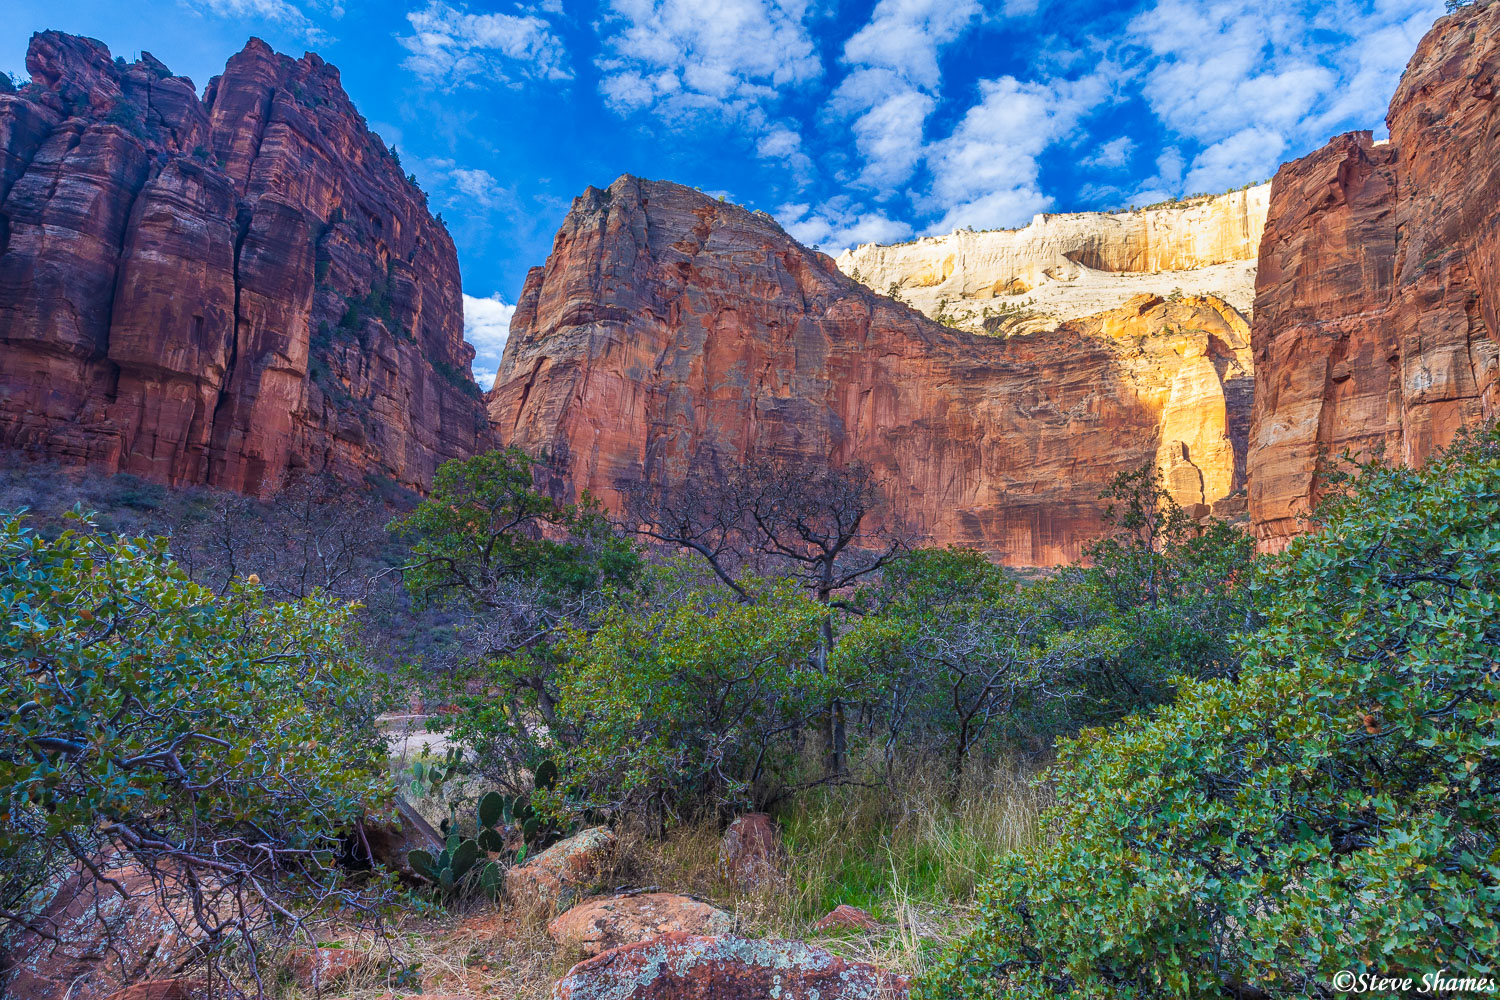 Here is what Zion National Park is famous for -- those steep tall red rock canyon walls.